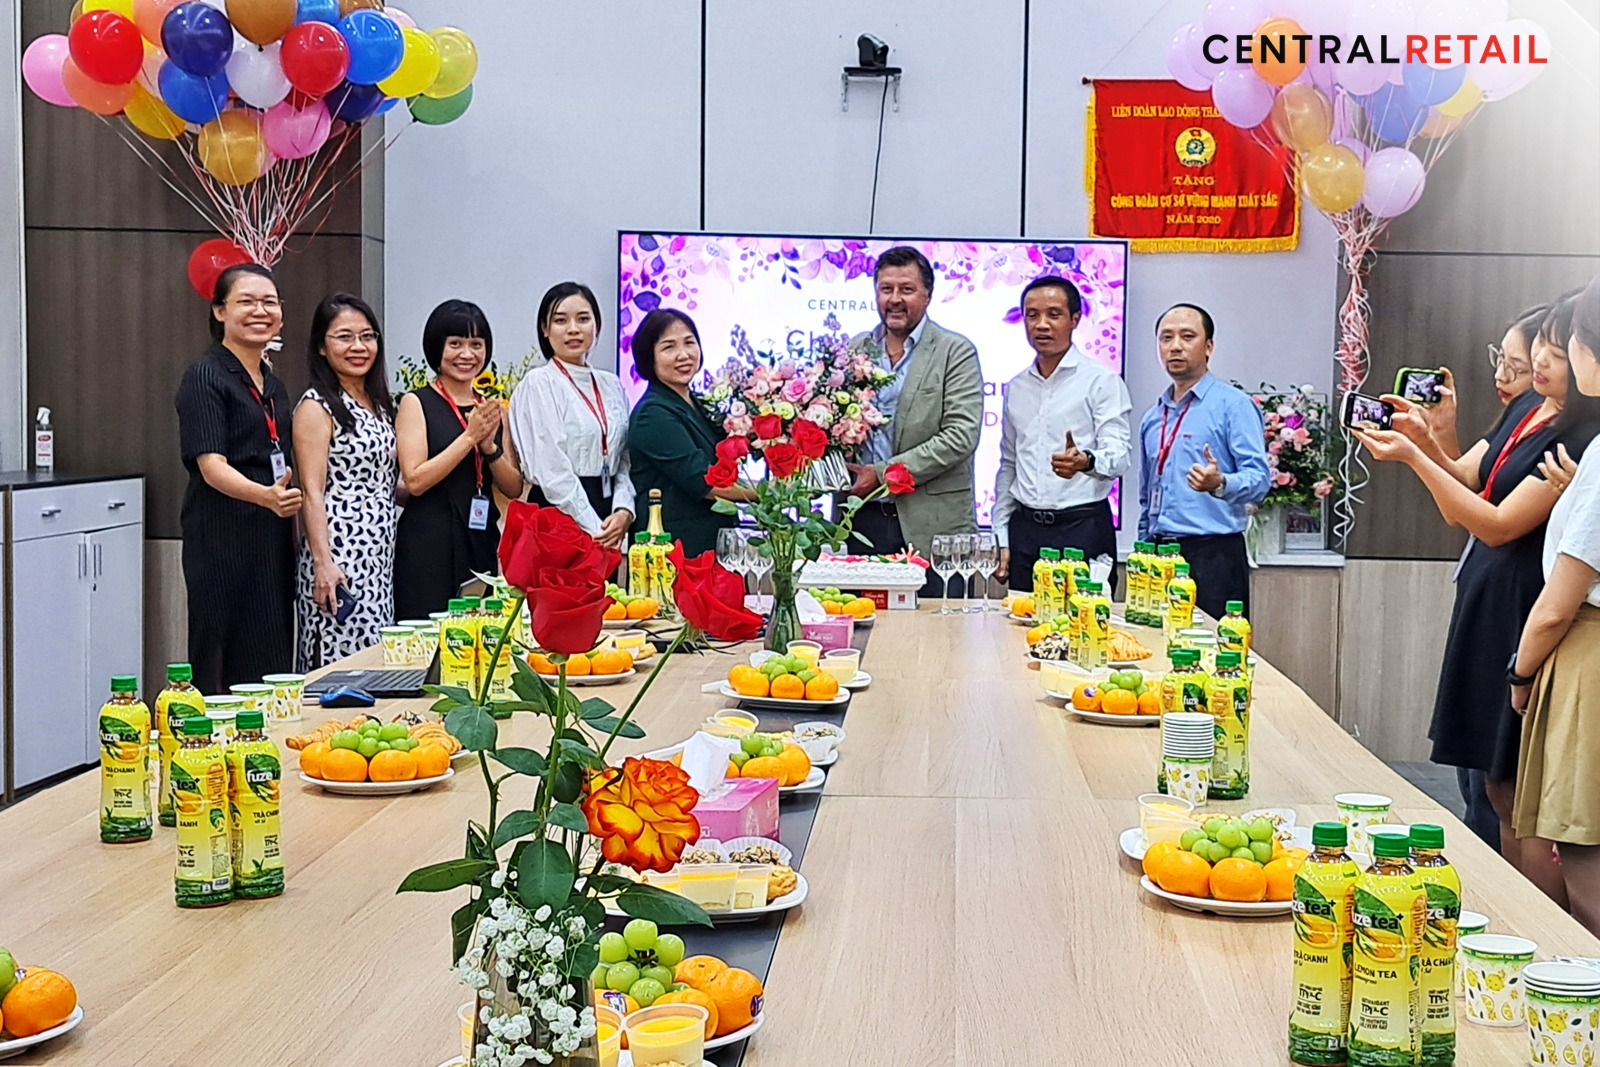 Central Retail in Vietnam celebrated Vietnamese Women’s Day with a series of activities for our women colleagues